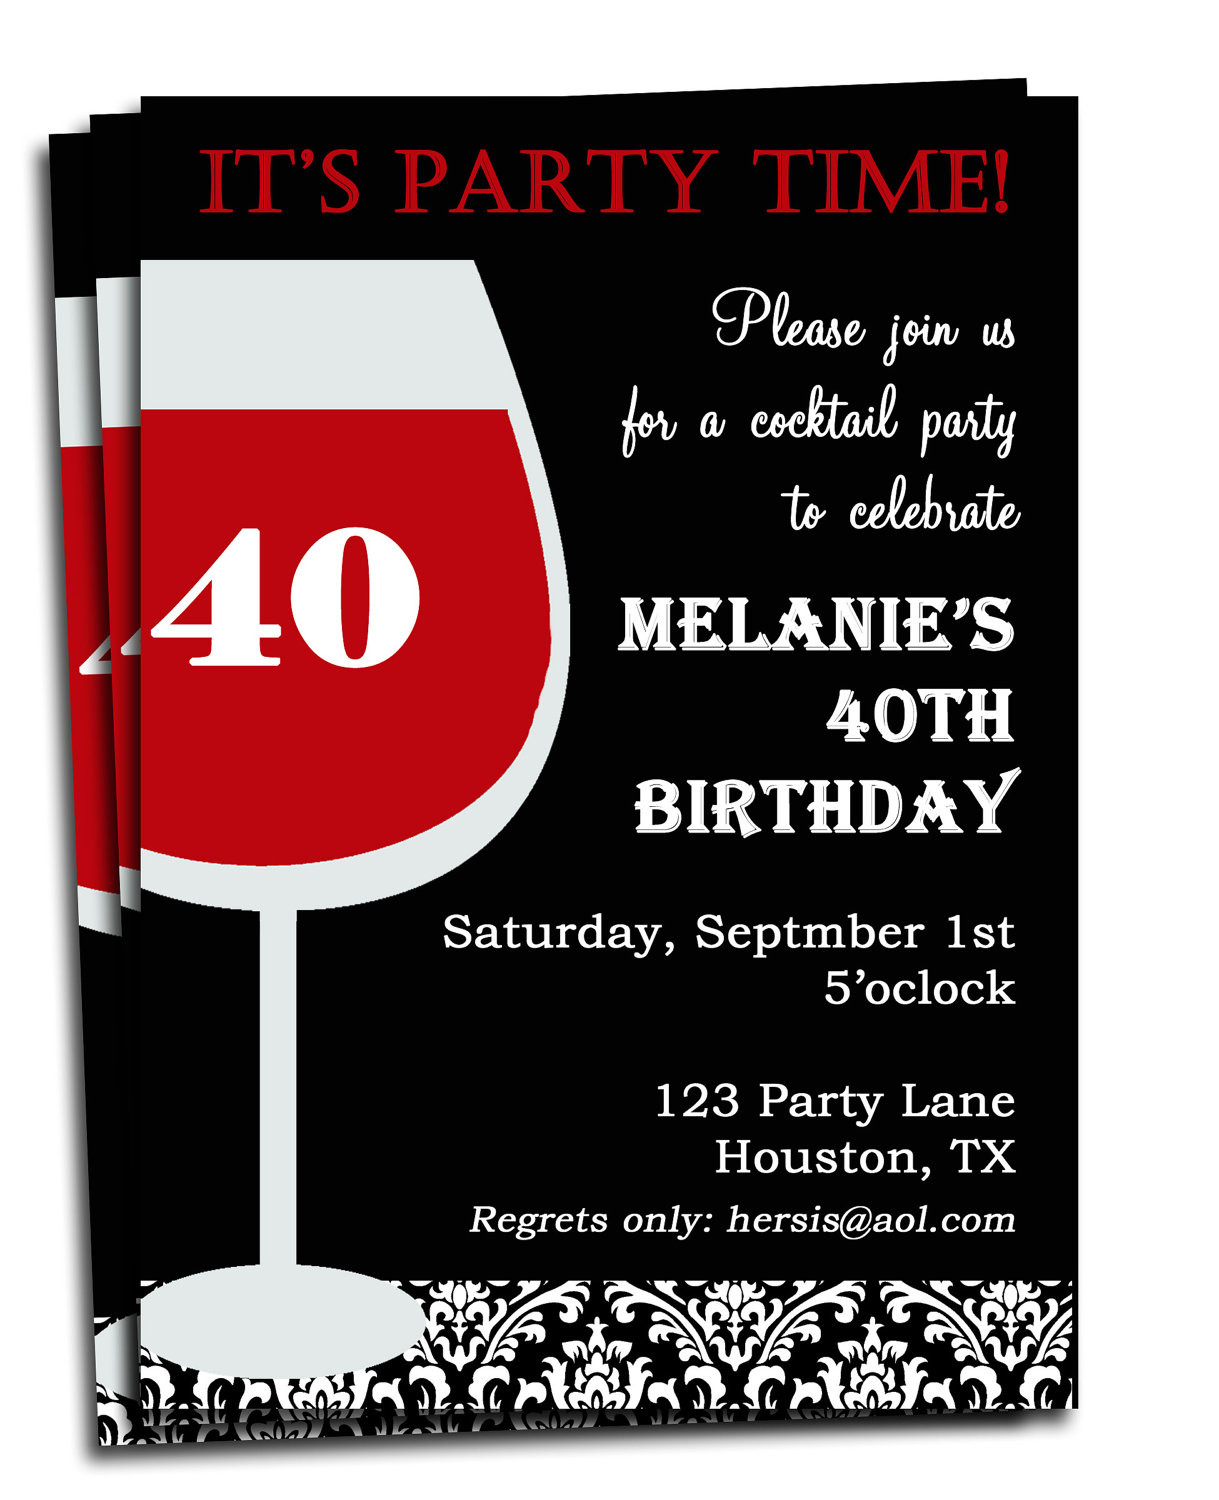 Personalized Birthday Party Invitations
 FREE Printable Personalized Birthday Invitations for